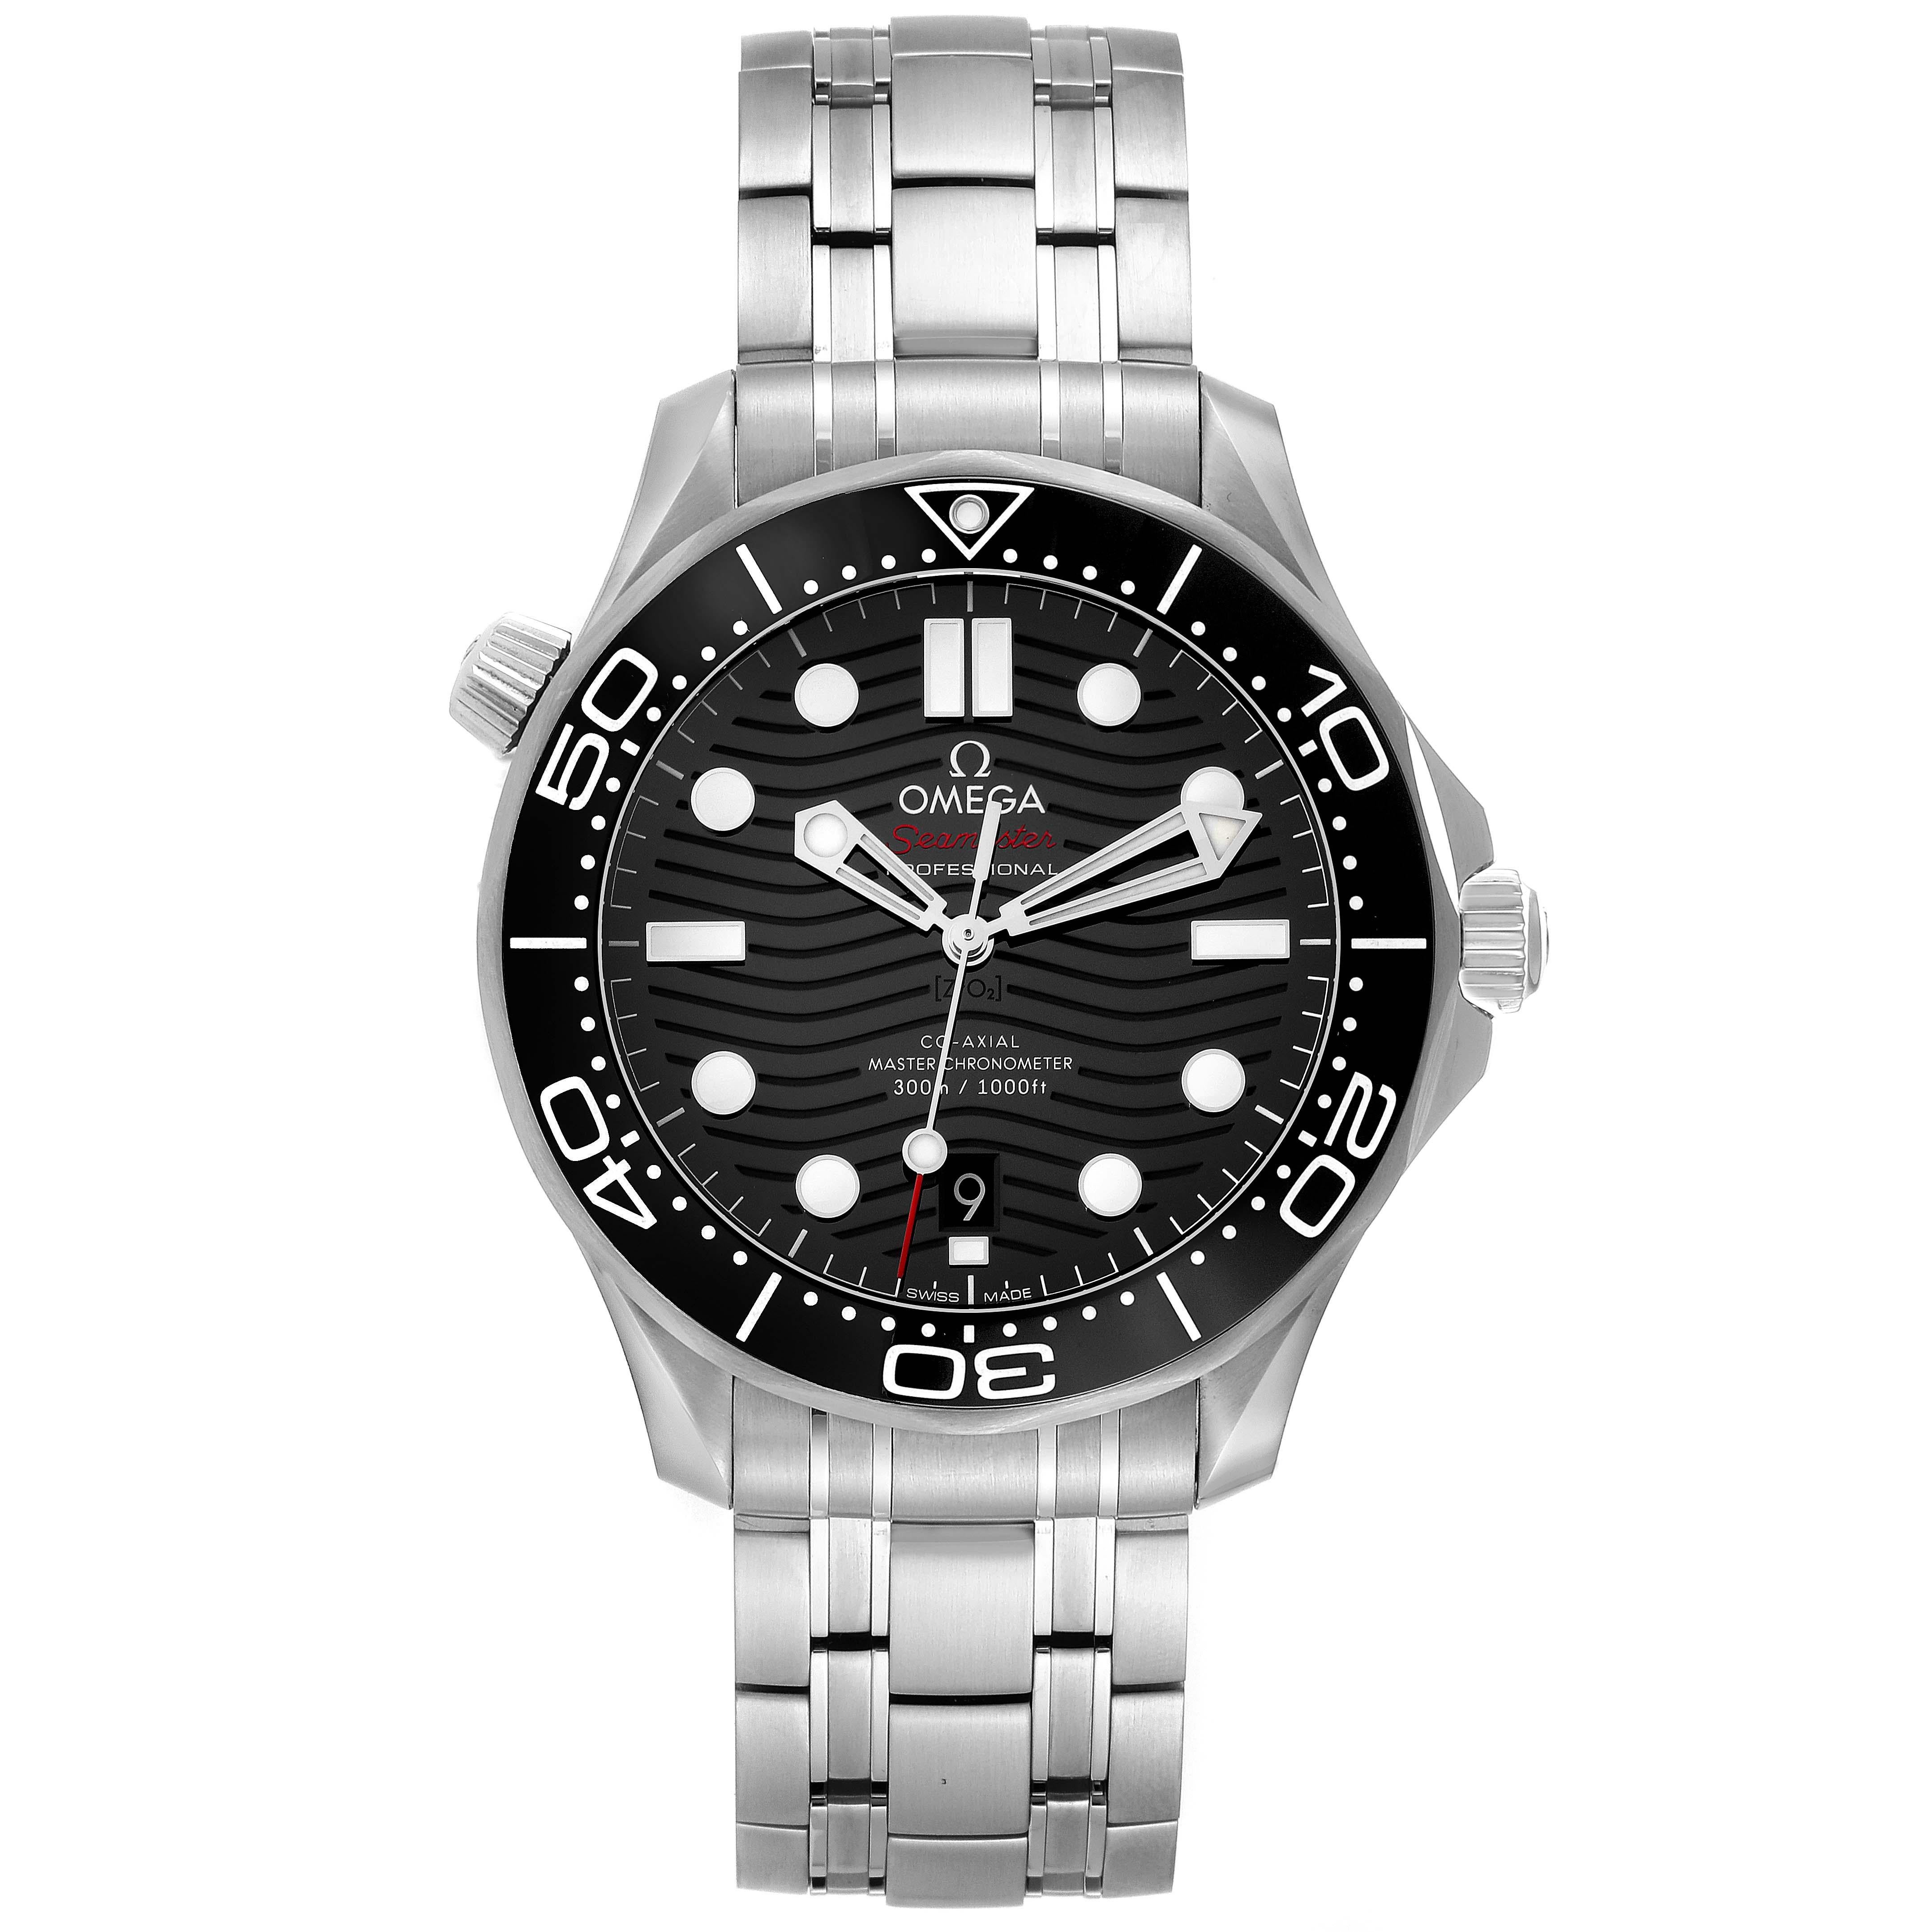 Omega Seamaster Diver 300M Steel Mens Watch 210.30.42.20.01.001 Unworn. Automatic self-winding movement with Co-Axial escapement. Certified Master Chronometer, approved by METAS, resistant to magnetic fields reaching 15,000 gauss. Free